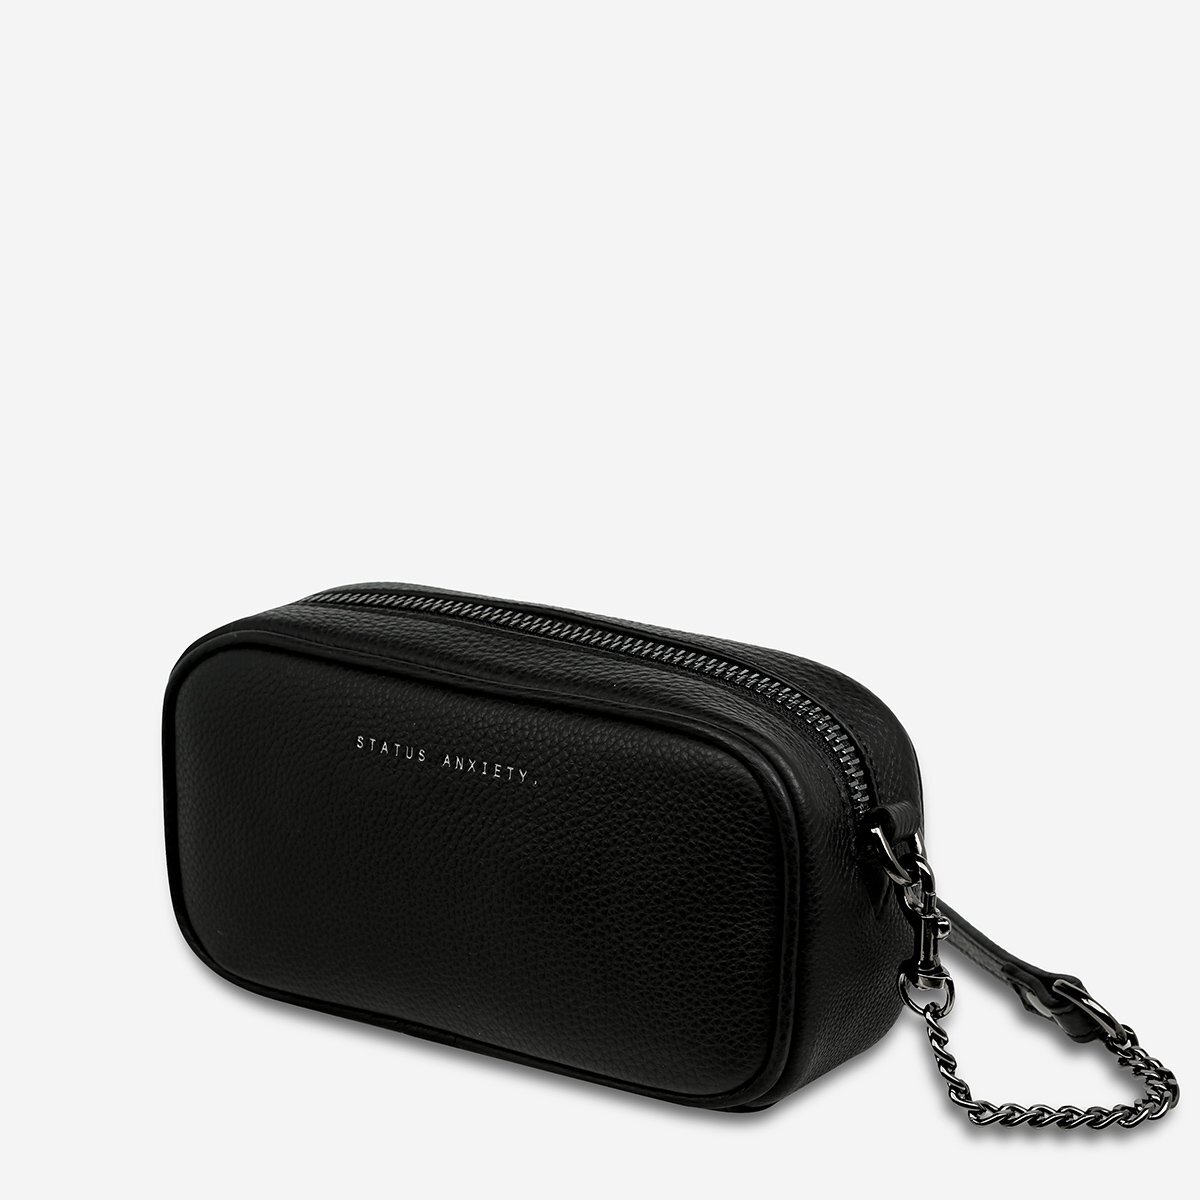 New Normal Bag (Black) - Accessories-Bags / Wallets : Just Looking ...